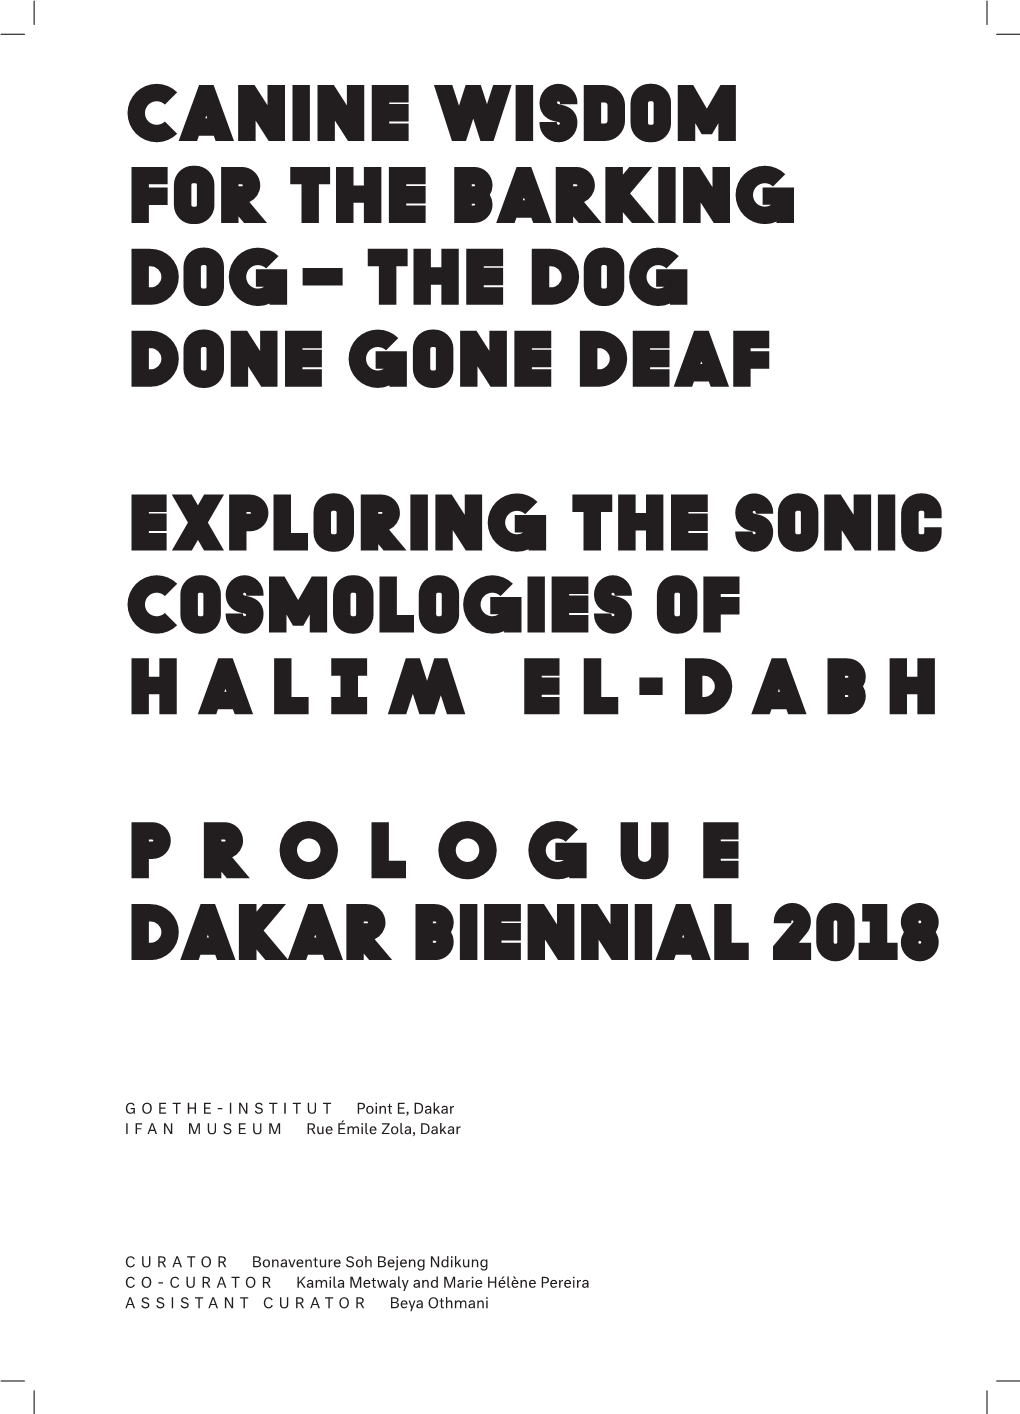 The Dog Done Gone Deaf Exploring the Sonic Cosmologies Of